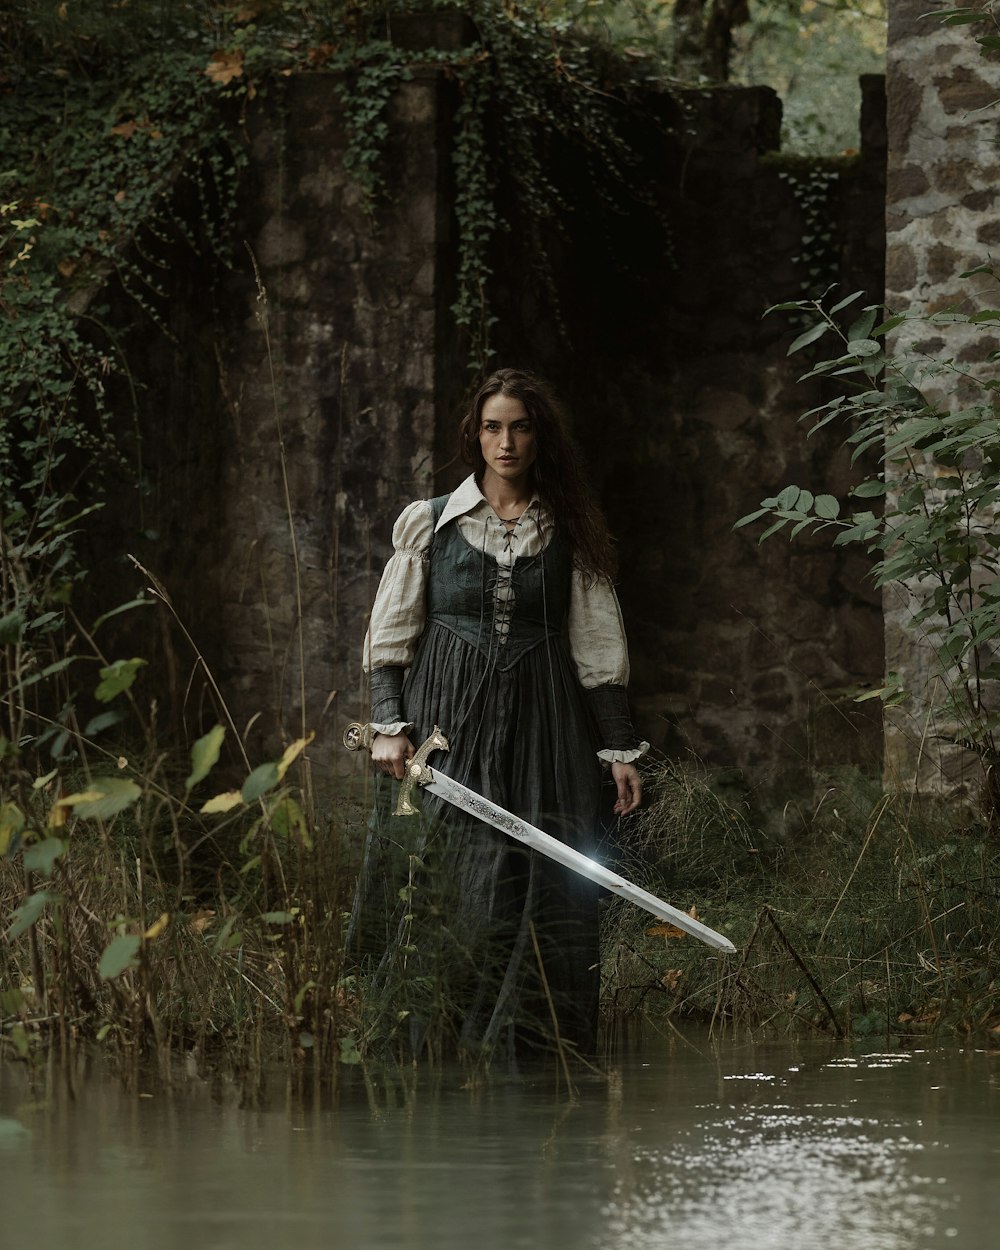 a woman in a dress holding a sword by a body of water